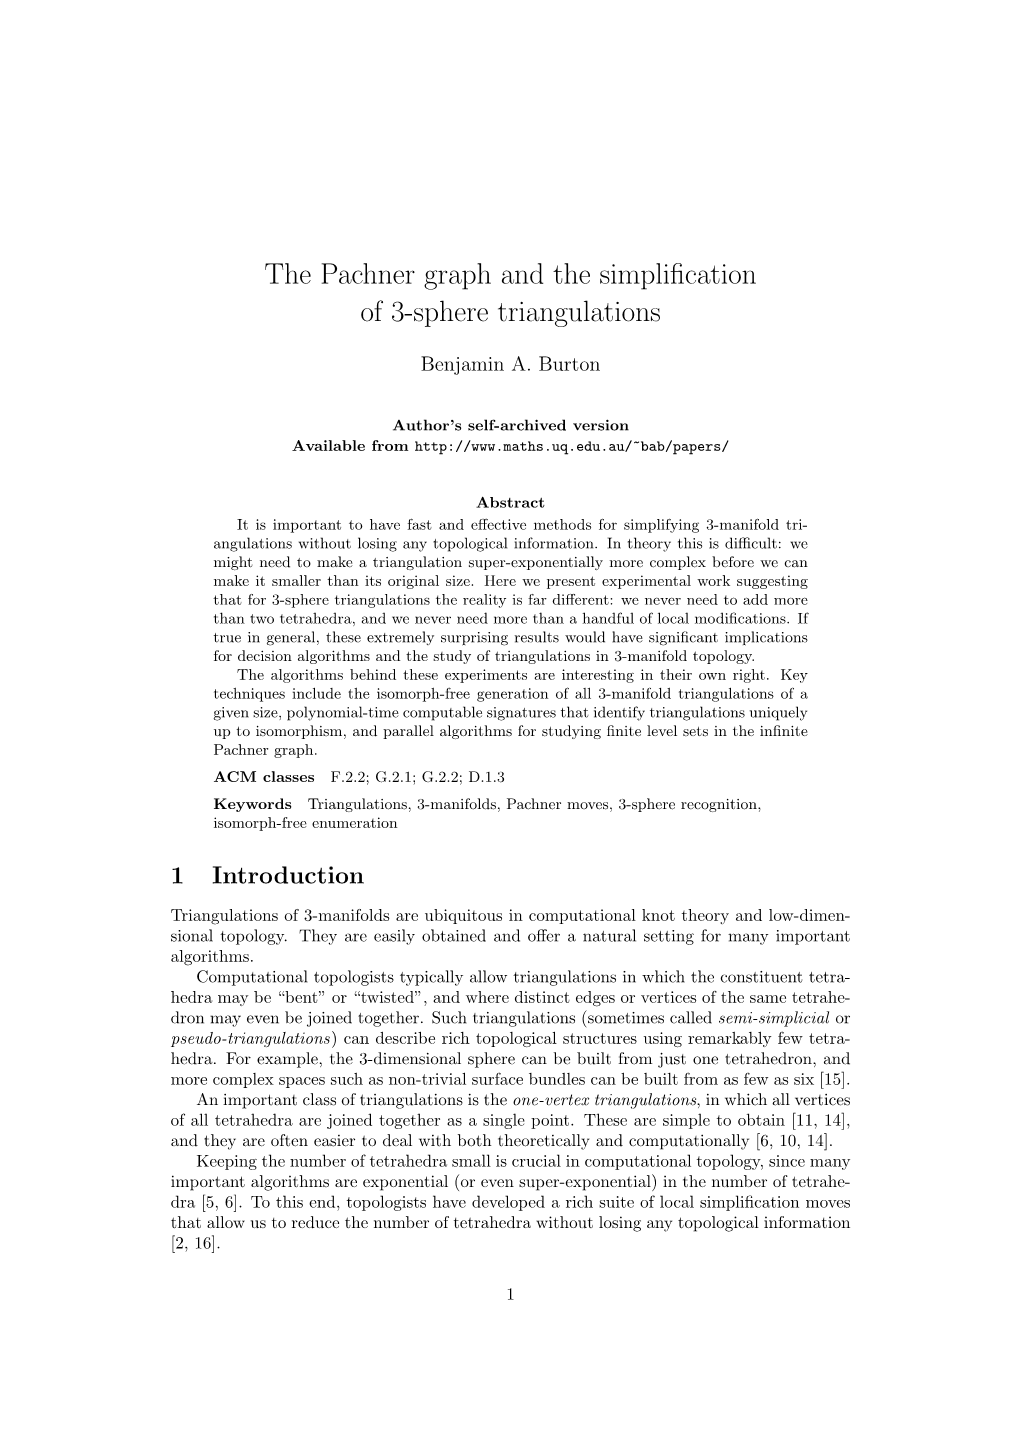 The Pachner Graph and the Simplification of 3-Sphere